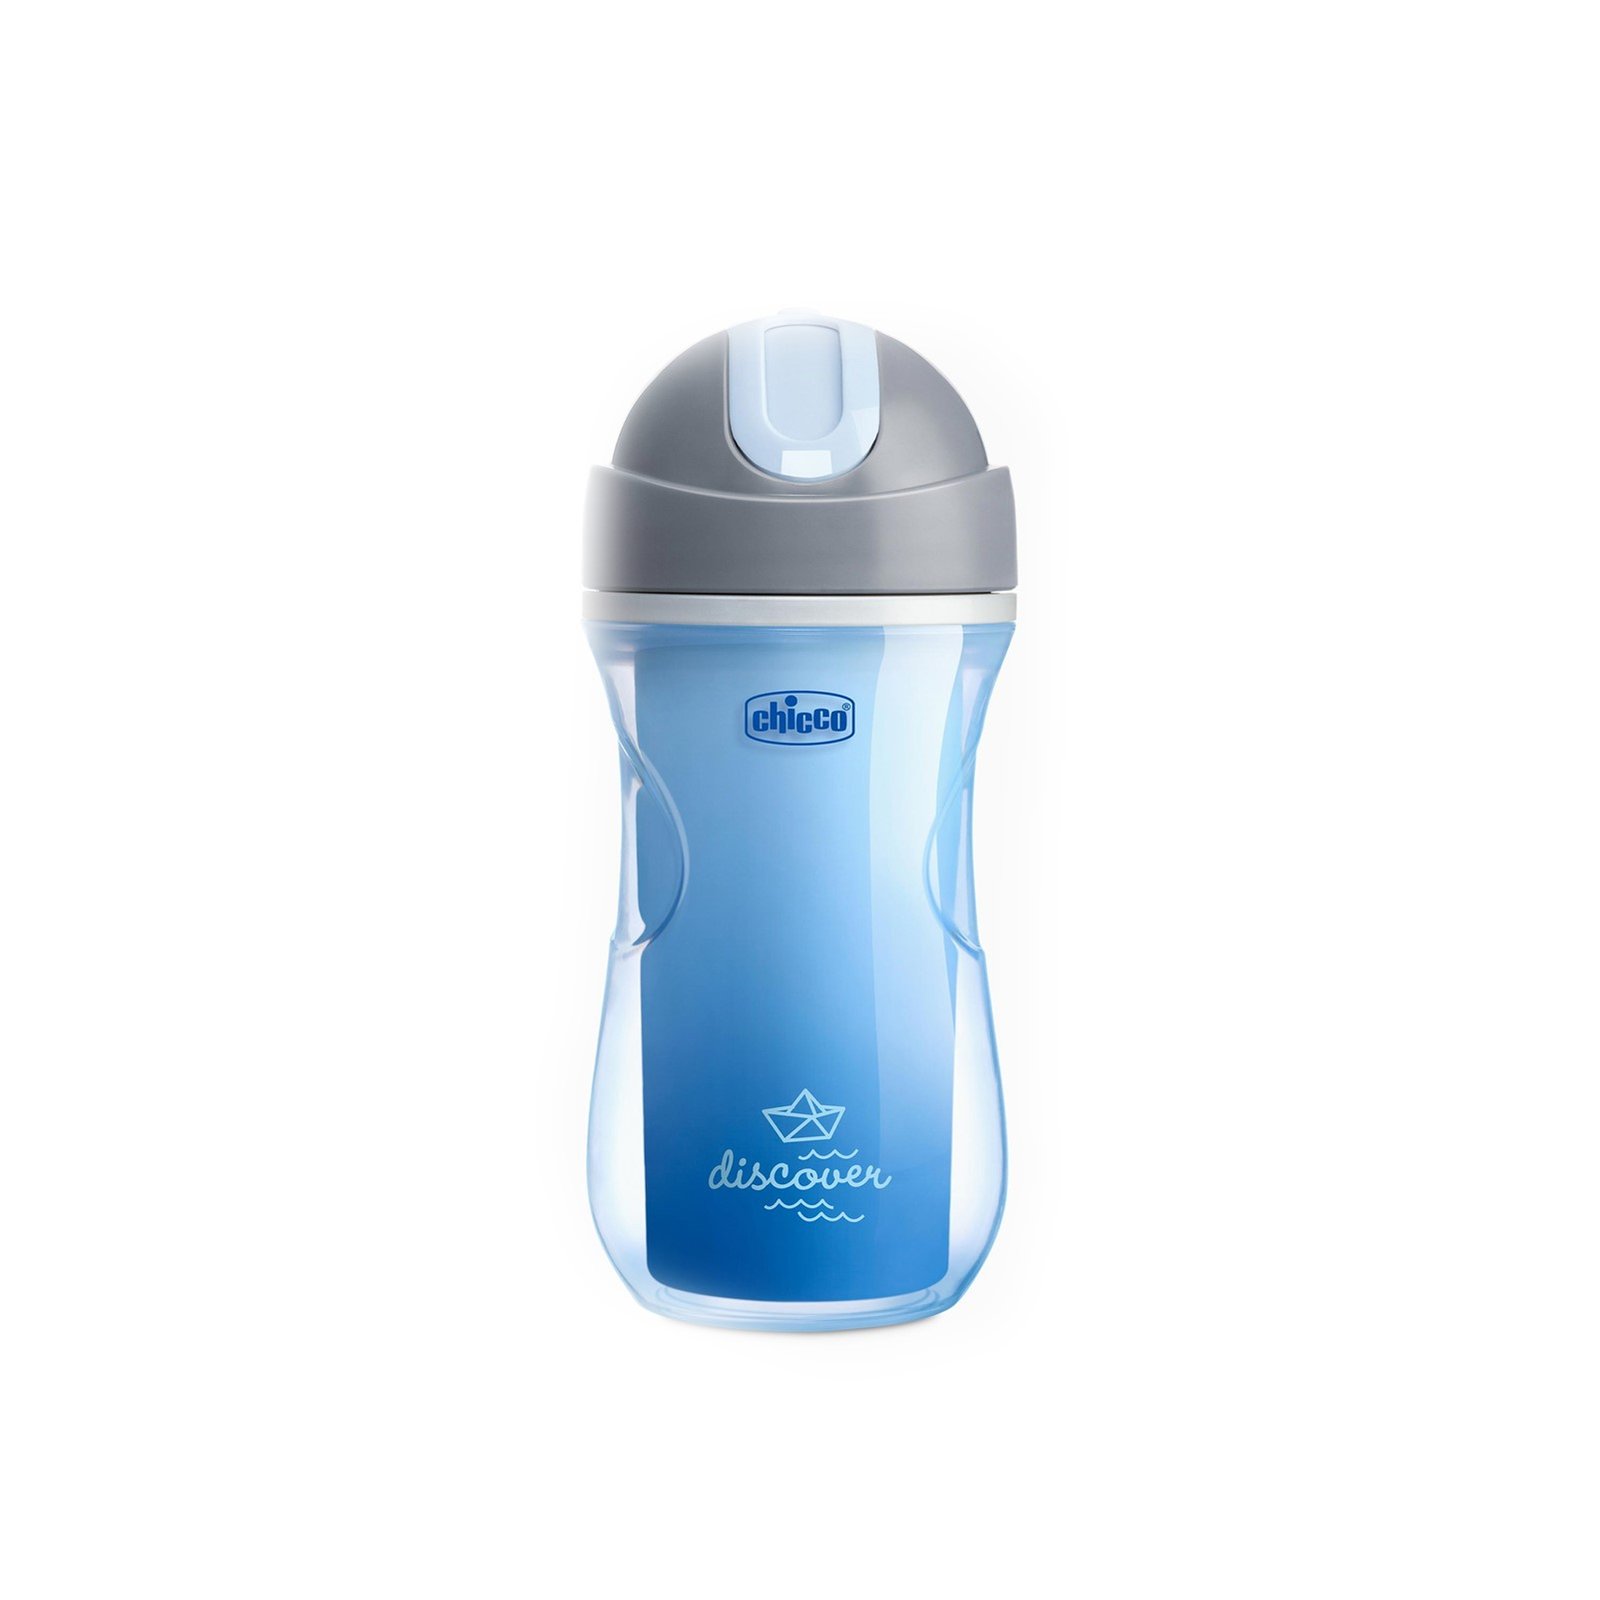 Chicco Mix & Match Sport Cup Insulated Bottle 14m+ Blue 266ml (9 fl oz)